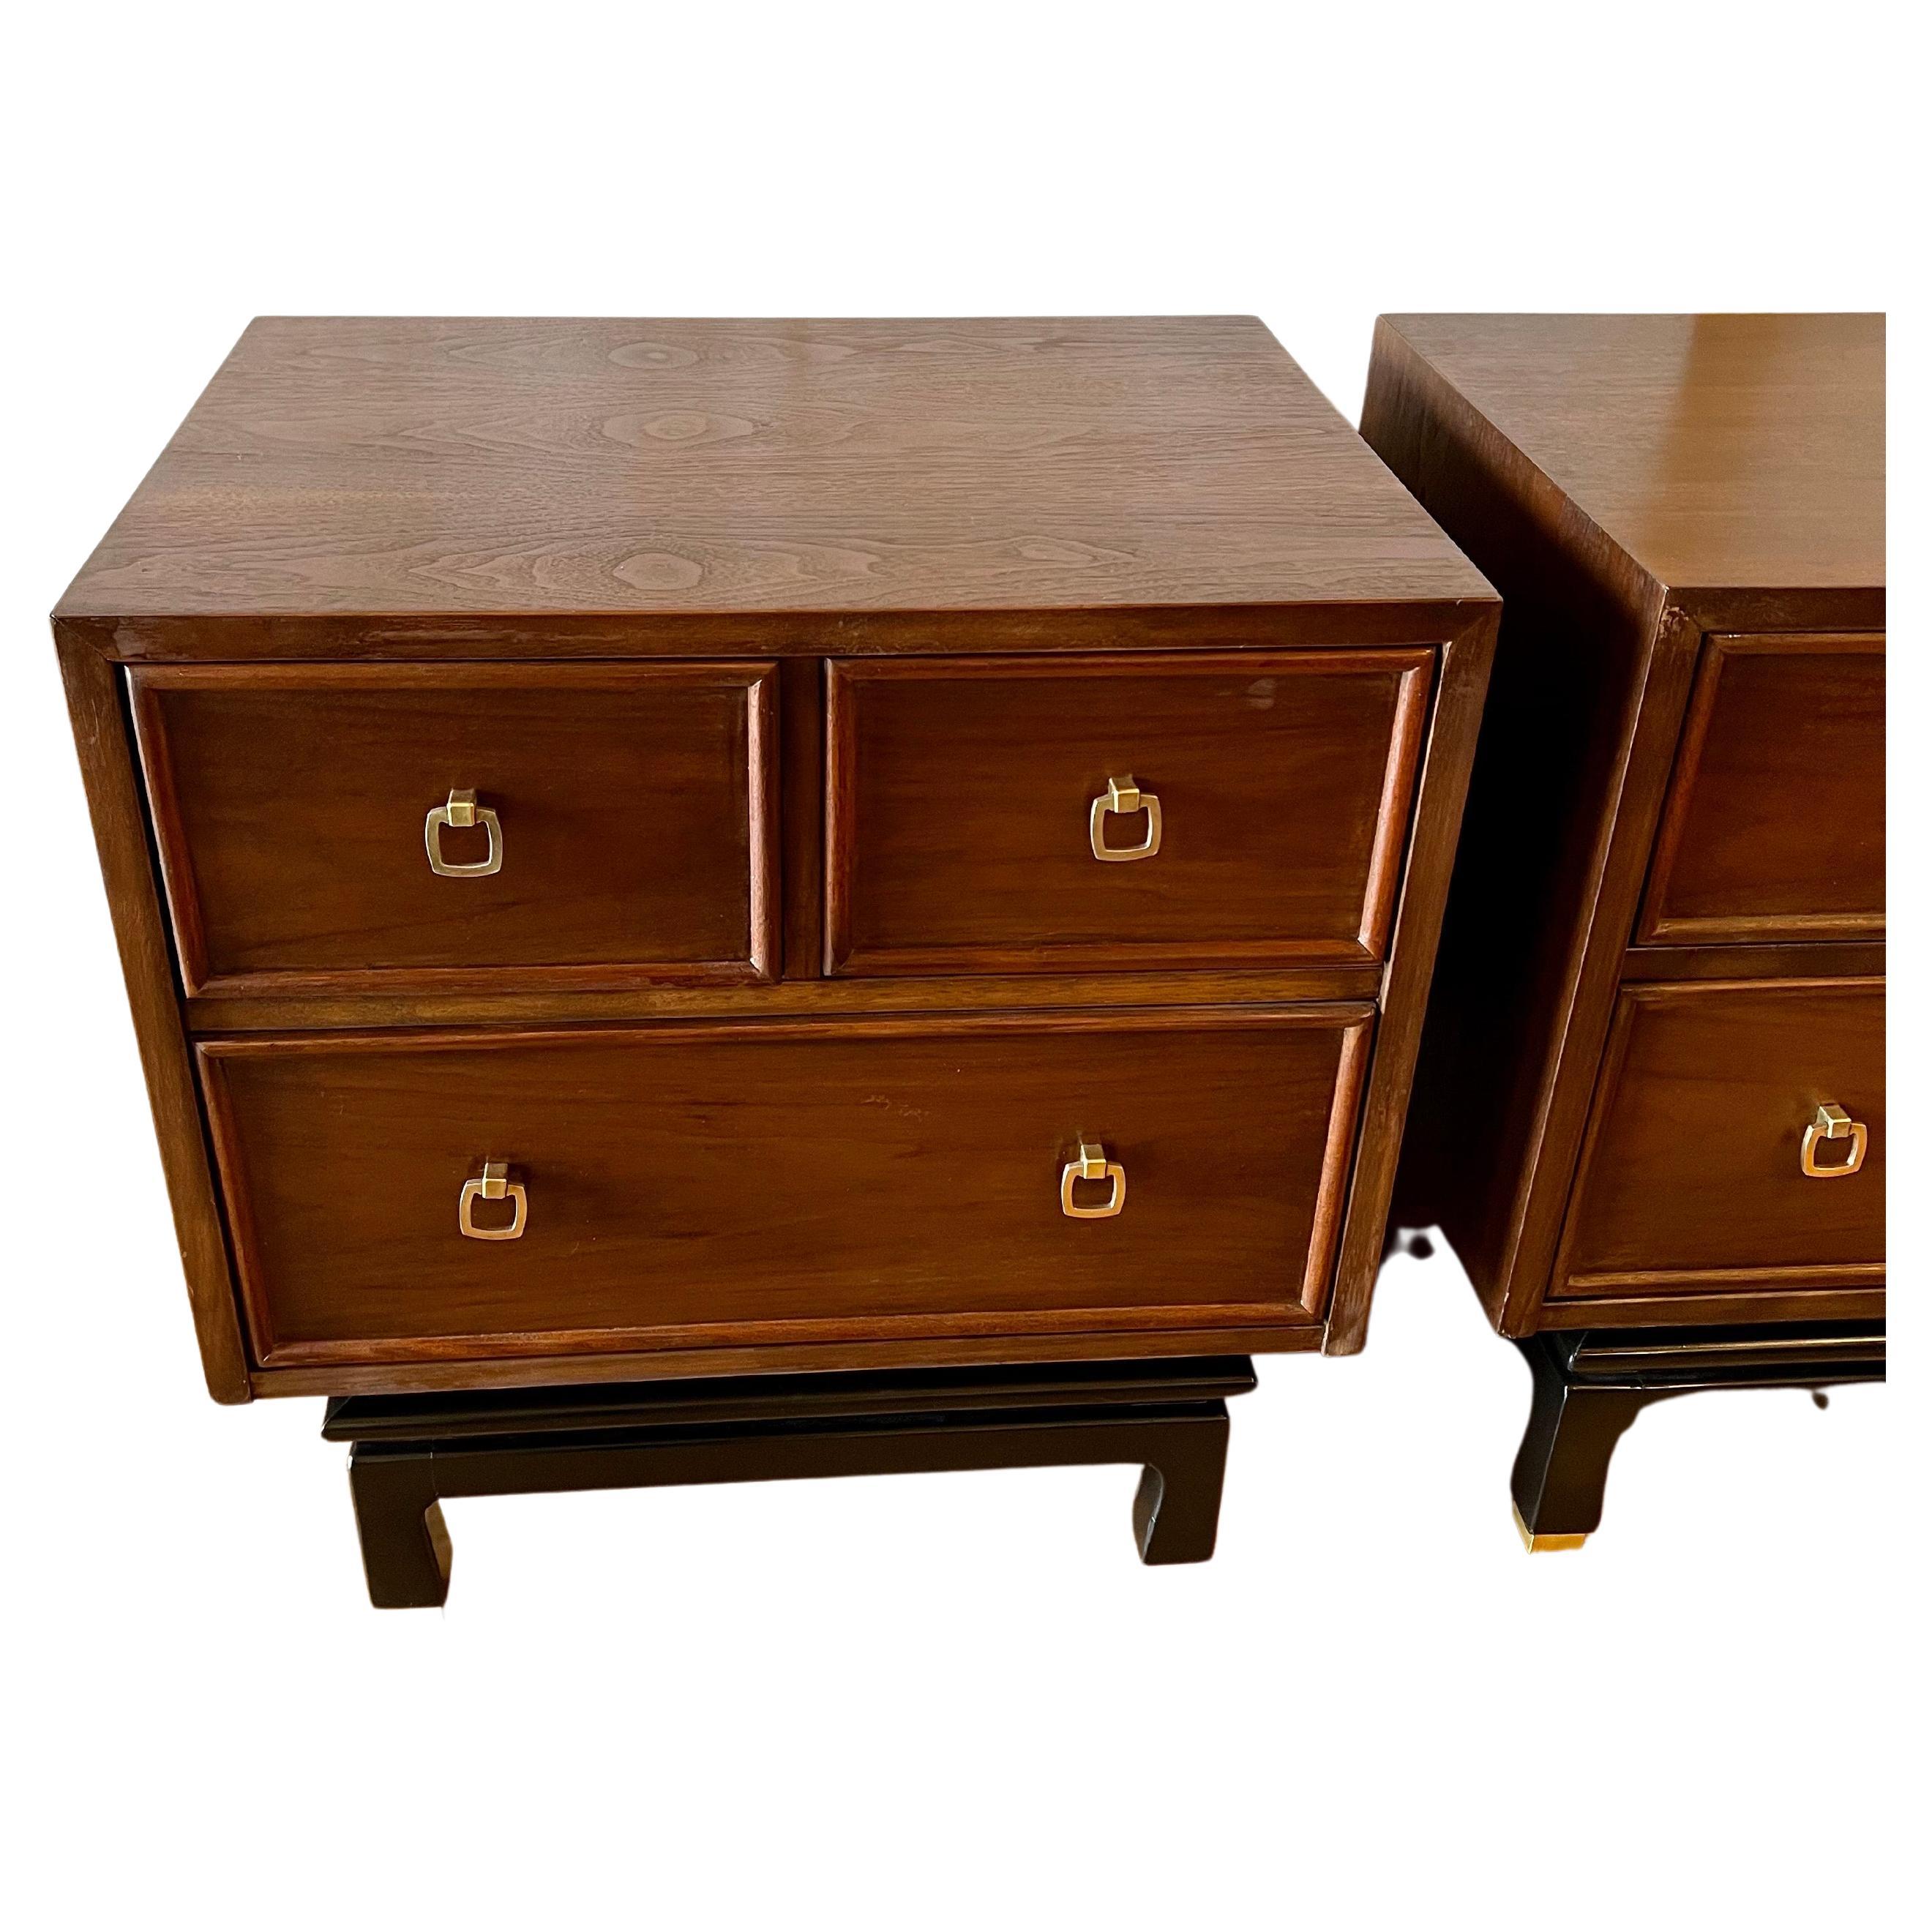 Beautiful elegant Mid-Century Modern pair of nightstands by American of Martinsville, circa 1960s freshly refinished in a walnut finish with black lacquered base and polished brass handles and legs tips, very clean and nice condition.